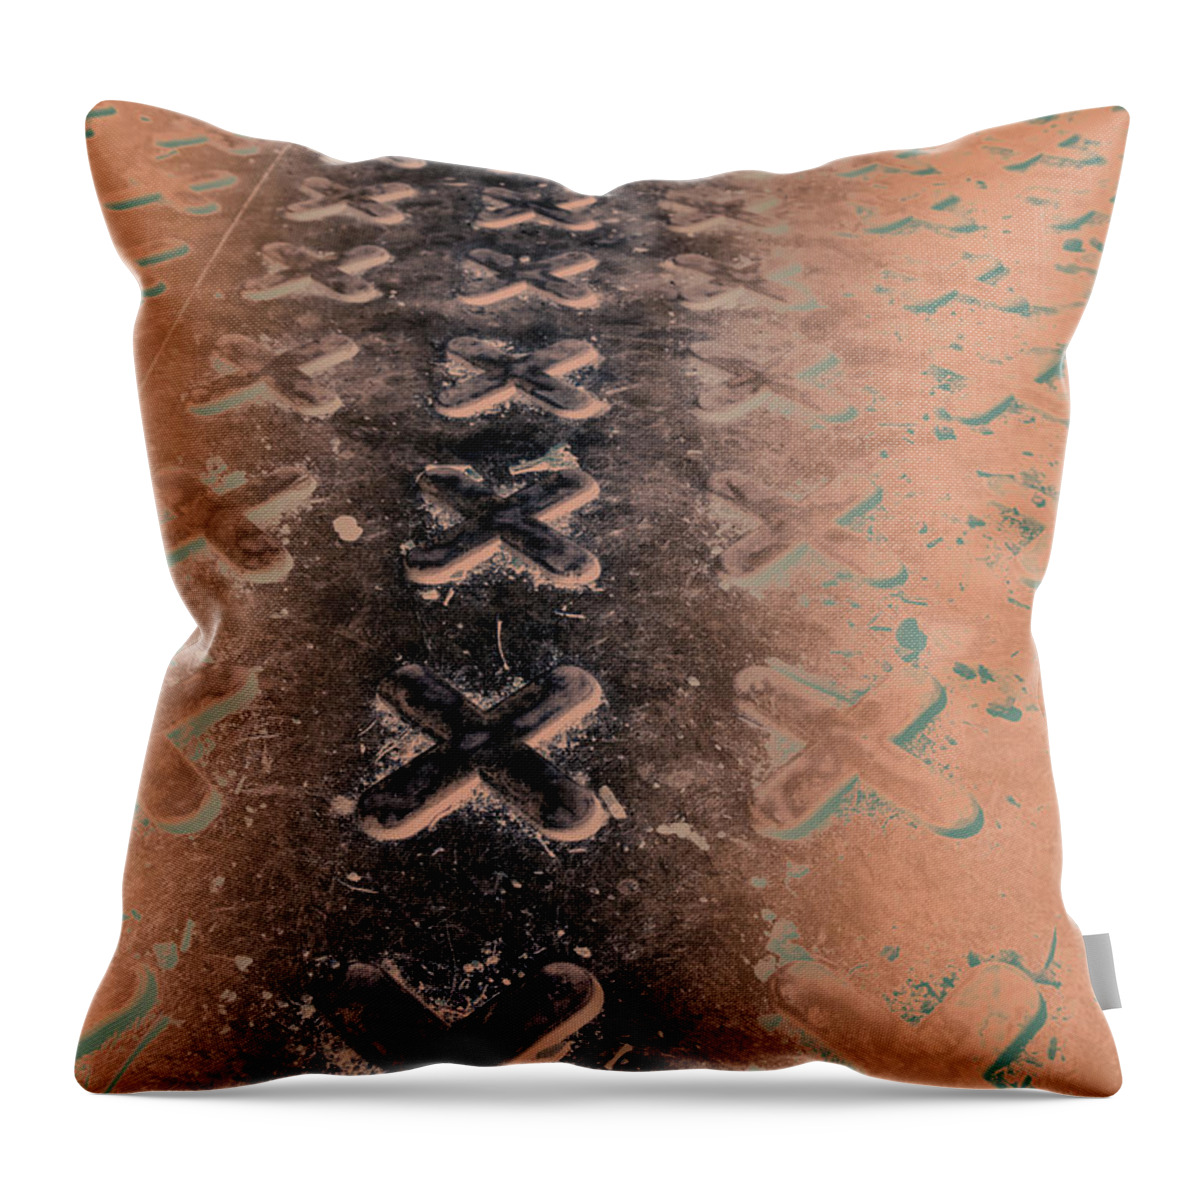 Metal Throw Pillow featuring the photograph No O's - Negative in Copper by Caitlyn Grasso